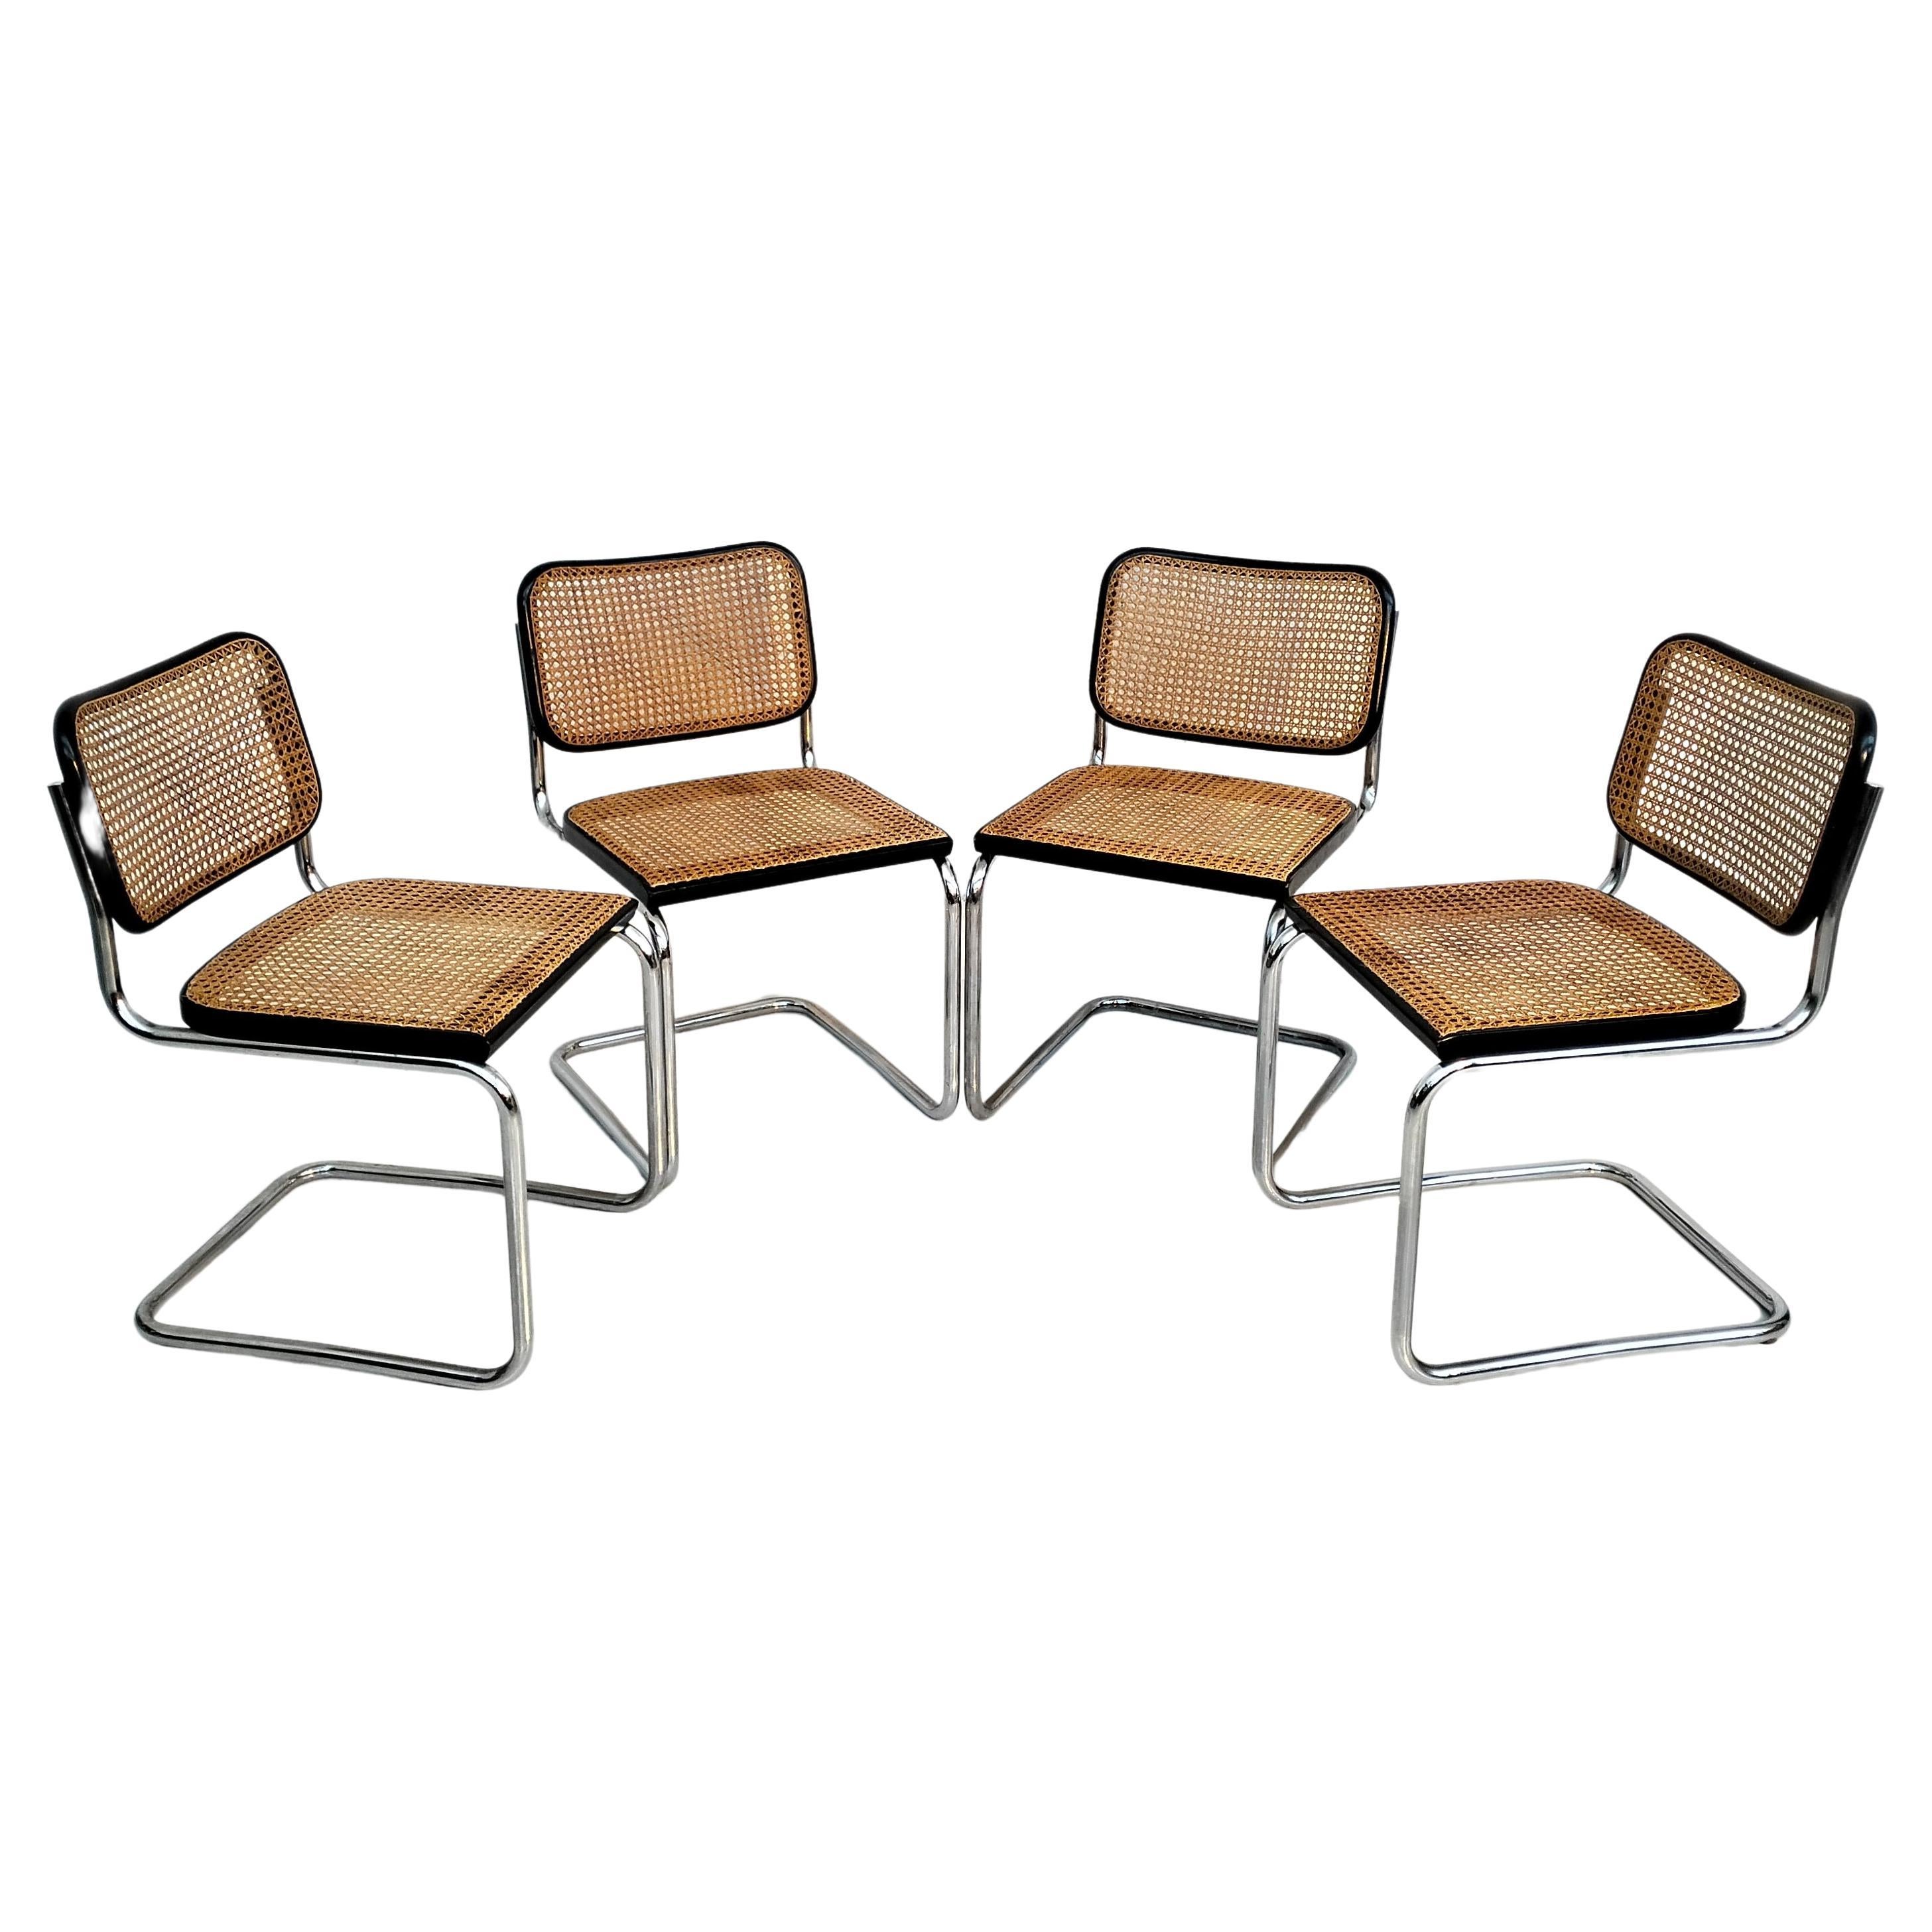 Set of 4 Original Cesca Chairs, by Marcel Breuer for Gavina, Italy